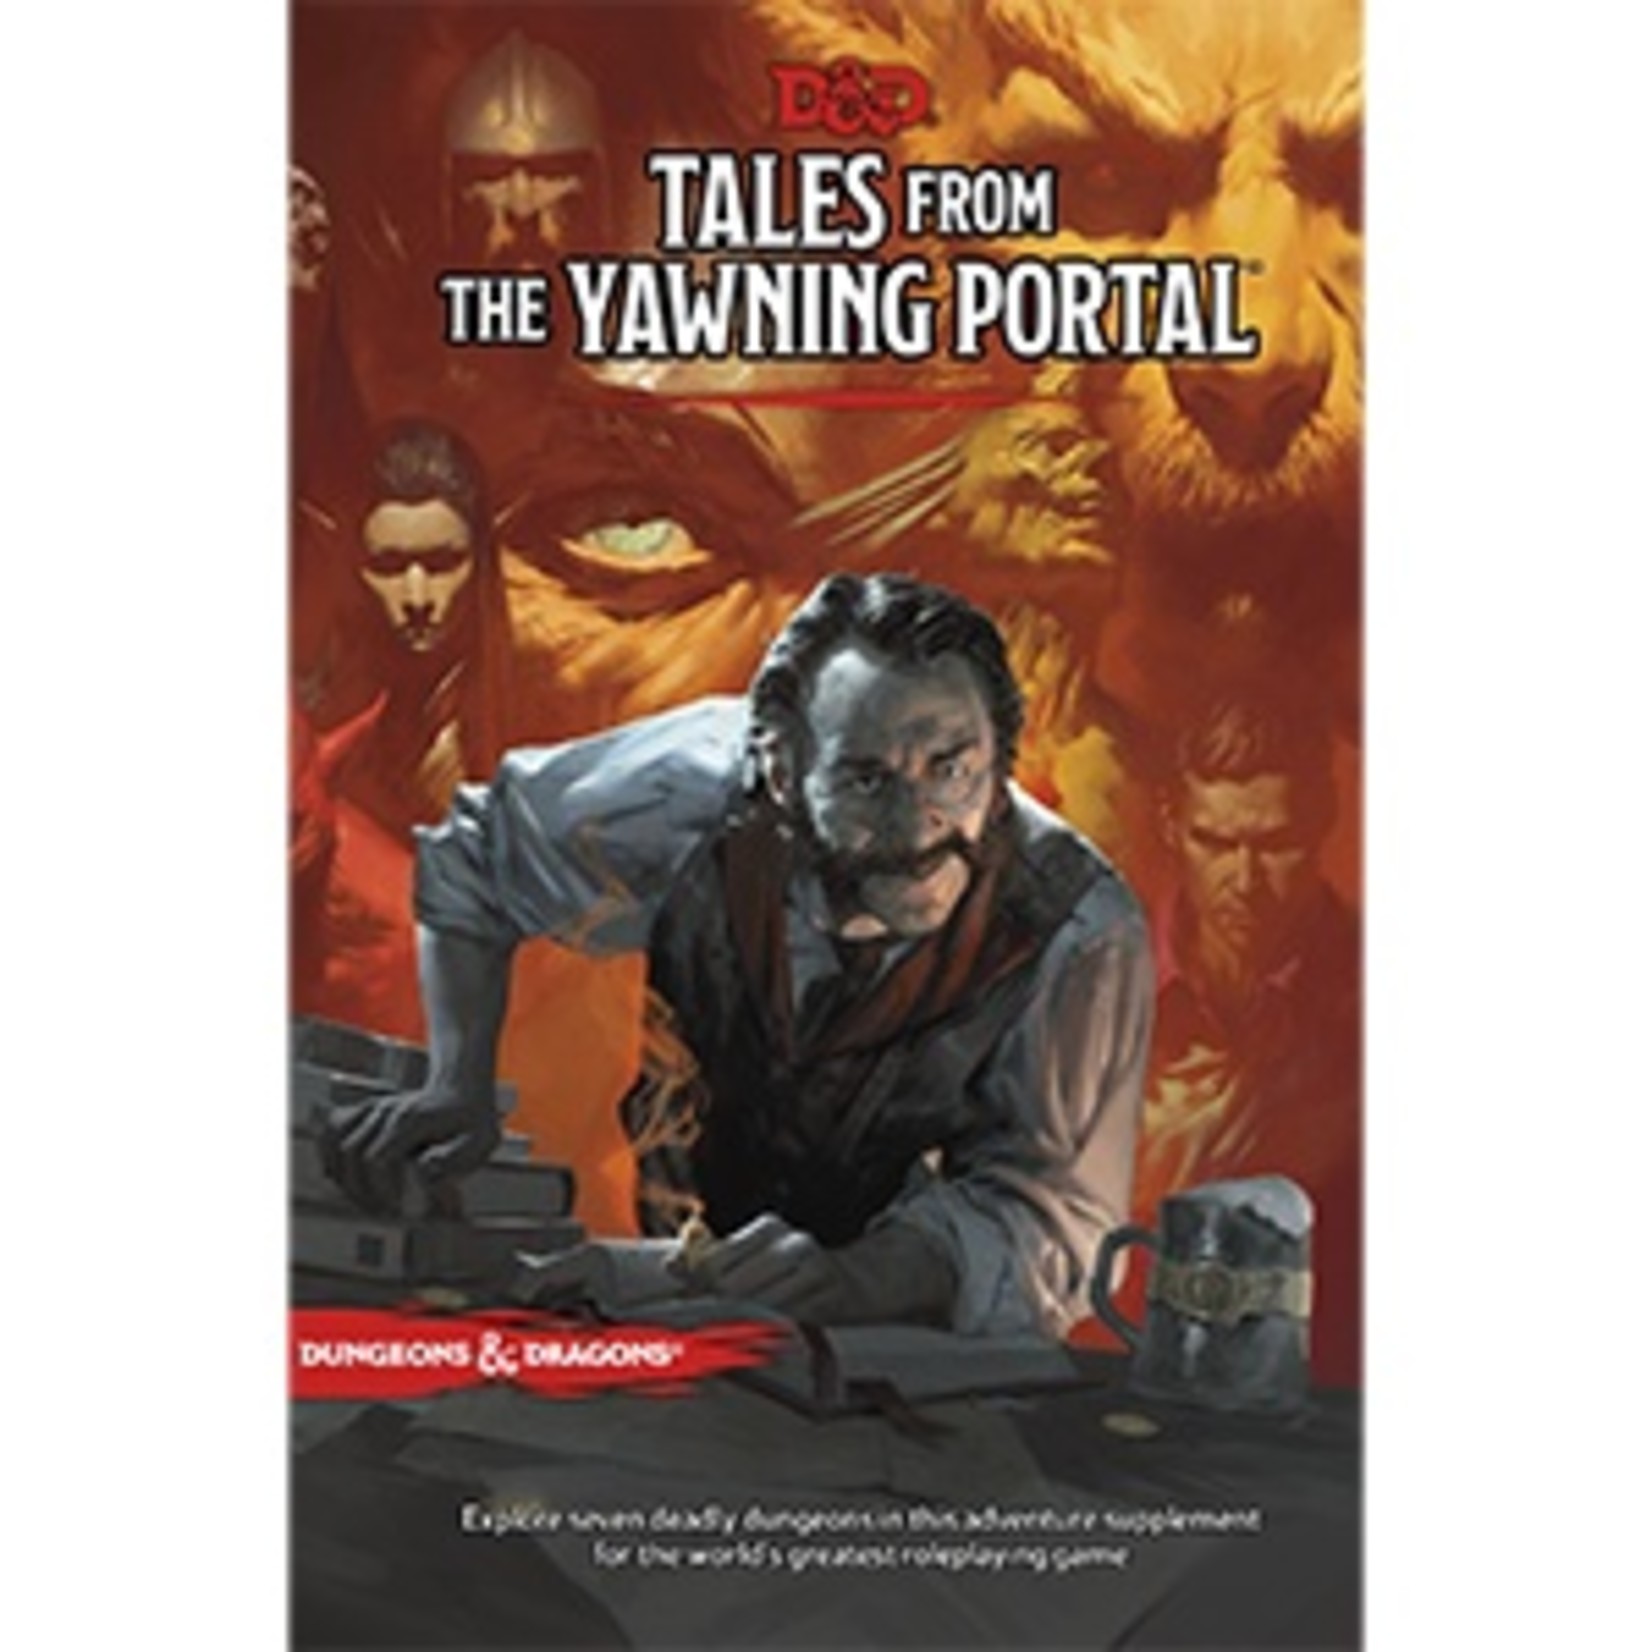 Wizards of the Coast D&D: Tales from the Yawning Portal